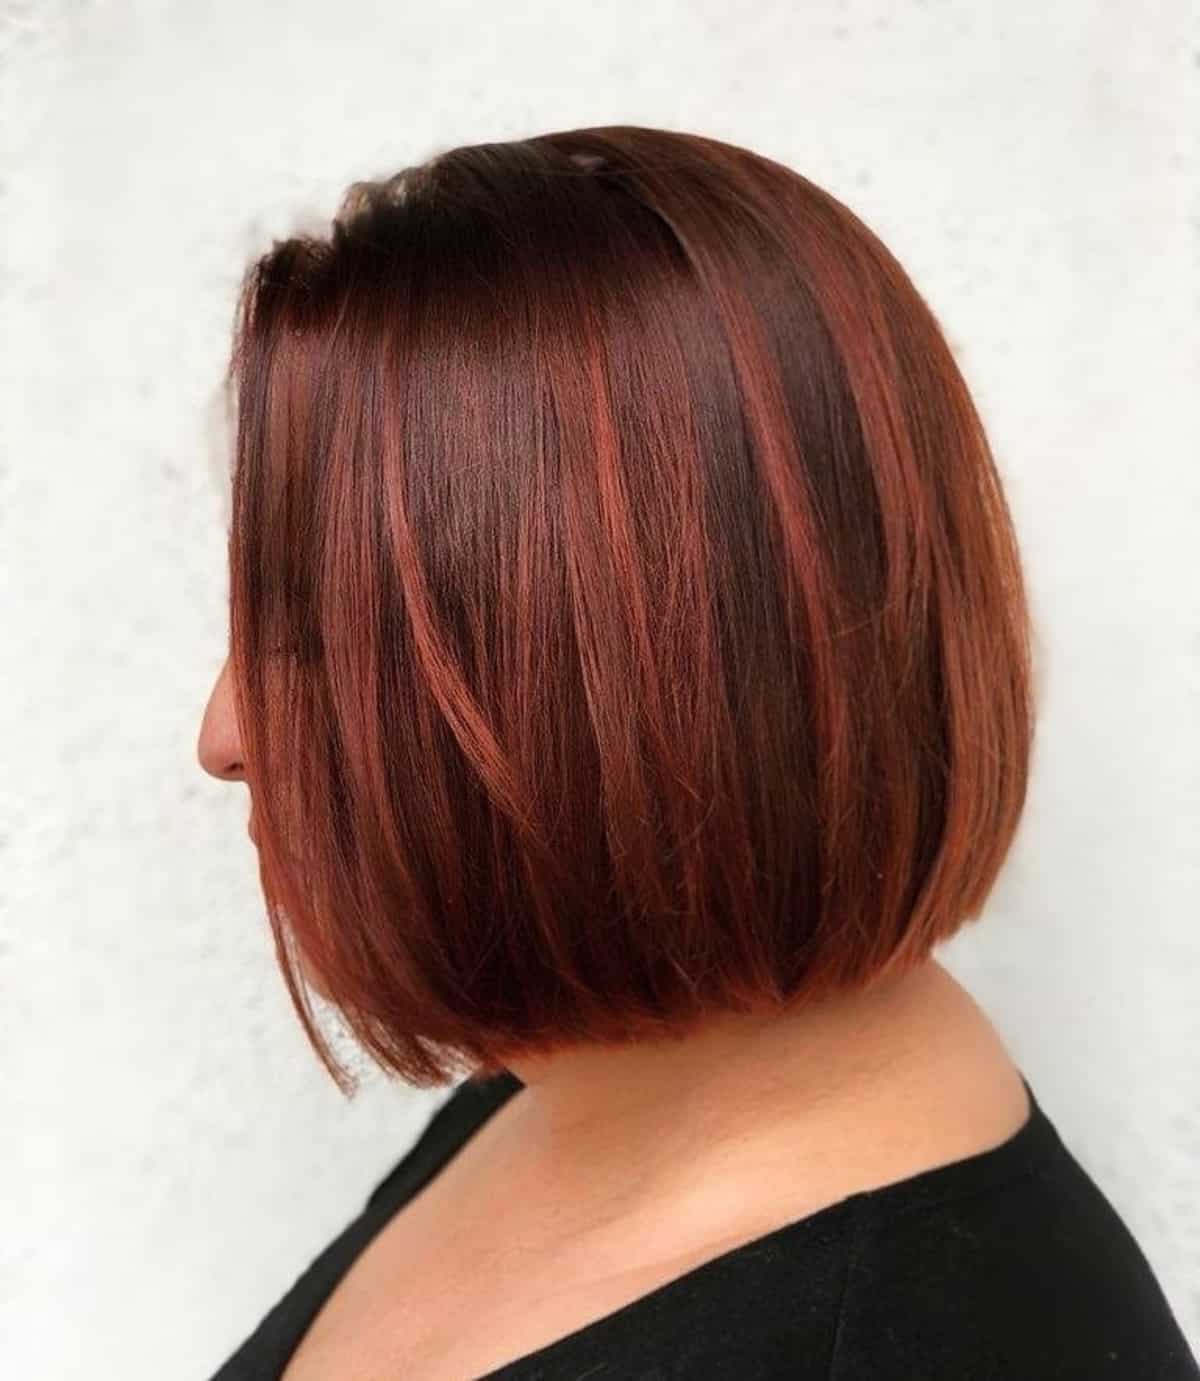 25 Trendy Ways to Pair Red Hair with Highlights